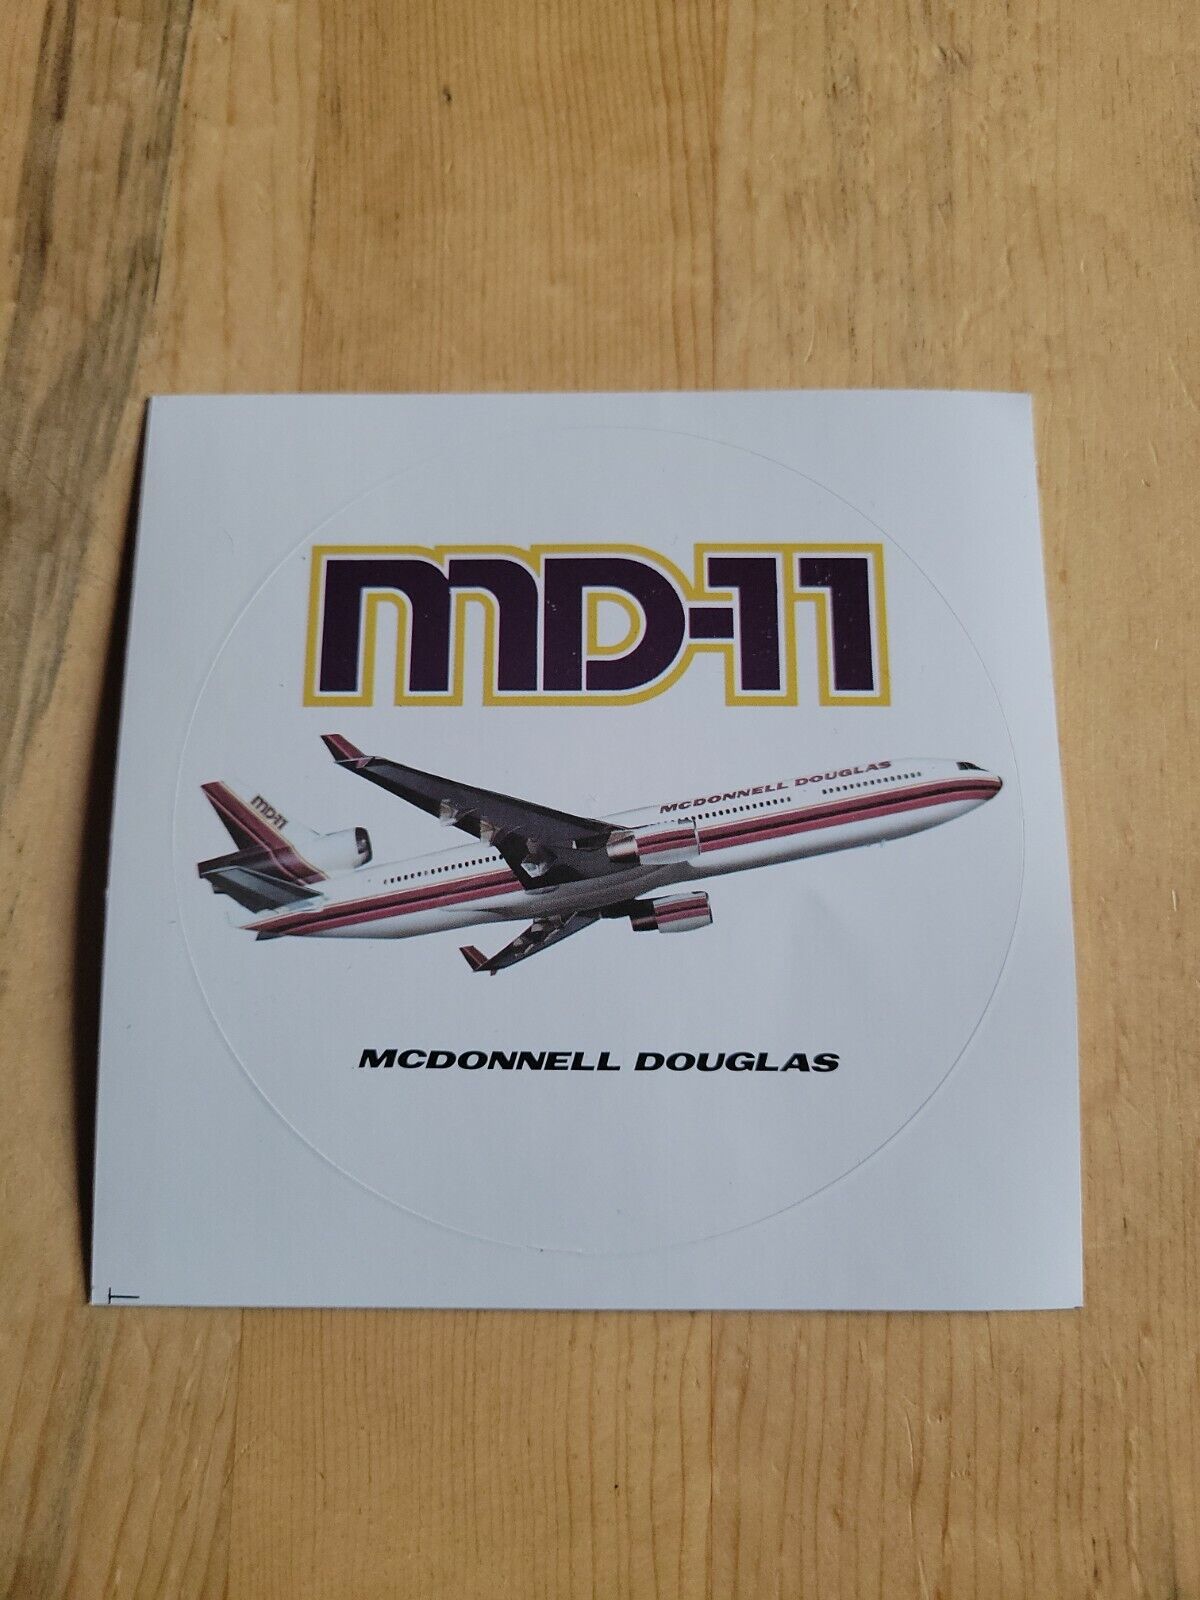 NOS VINTAGE MCDONNELL DOUGLAS MD-11 AIRCRAFT COMPANY COLLECTIBLE STICKER DECAL